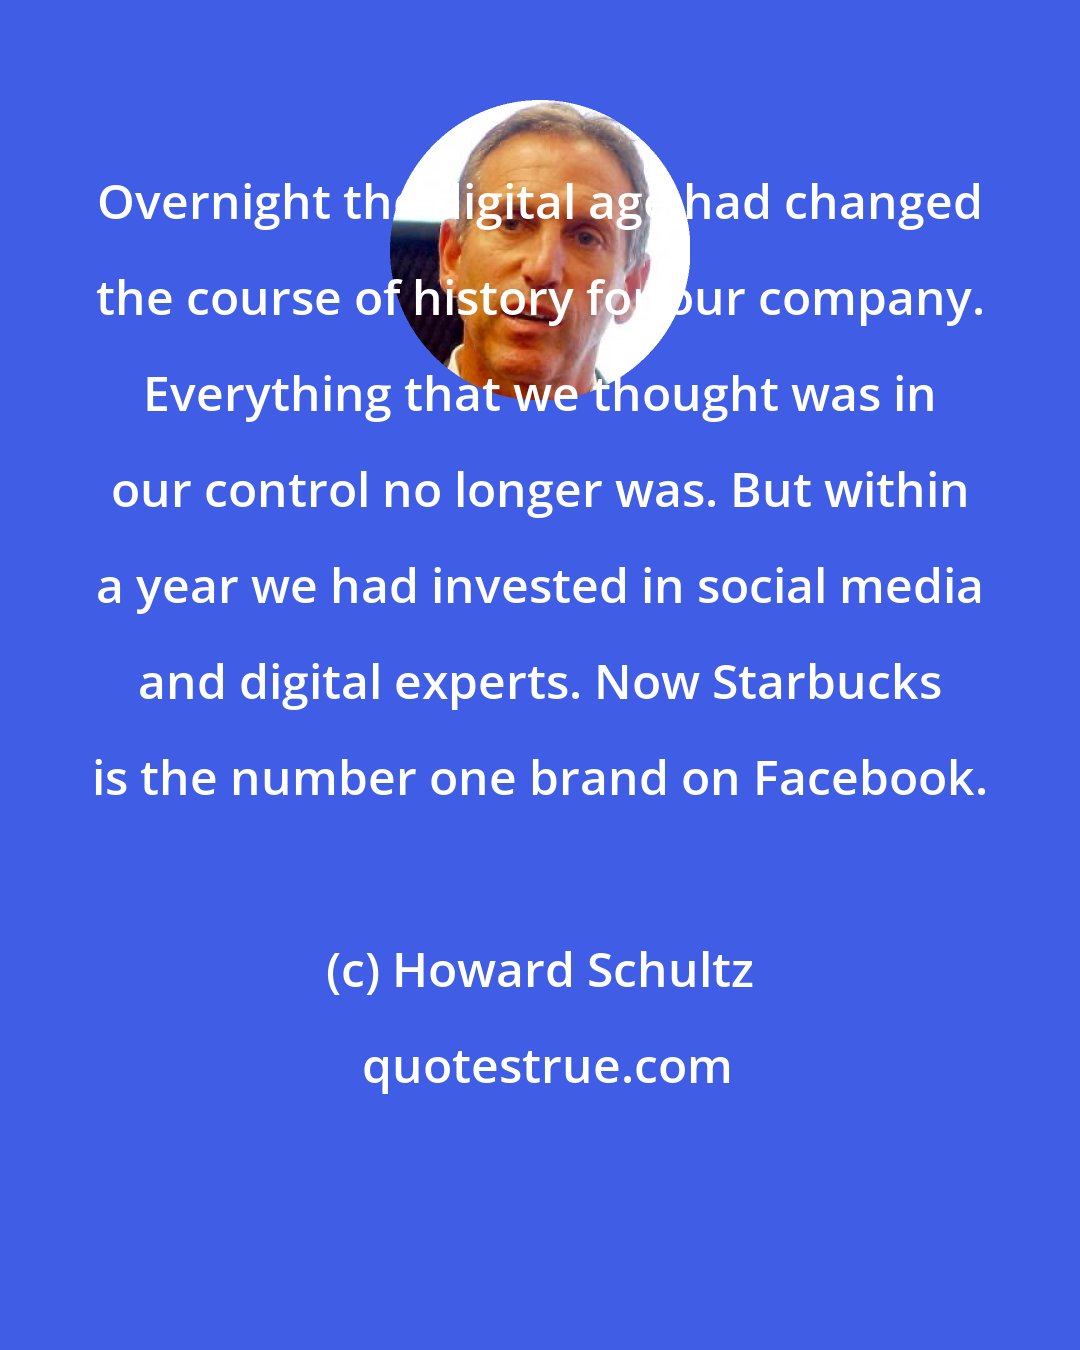 Howard Schultz: Overnight the digital age had changed the course of history for our company. Everything that we thought was in our control no longer was. But within a year we had invested in social media and digital experts. Now Starbucks is the number one brand on Facebook.